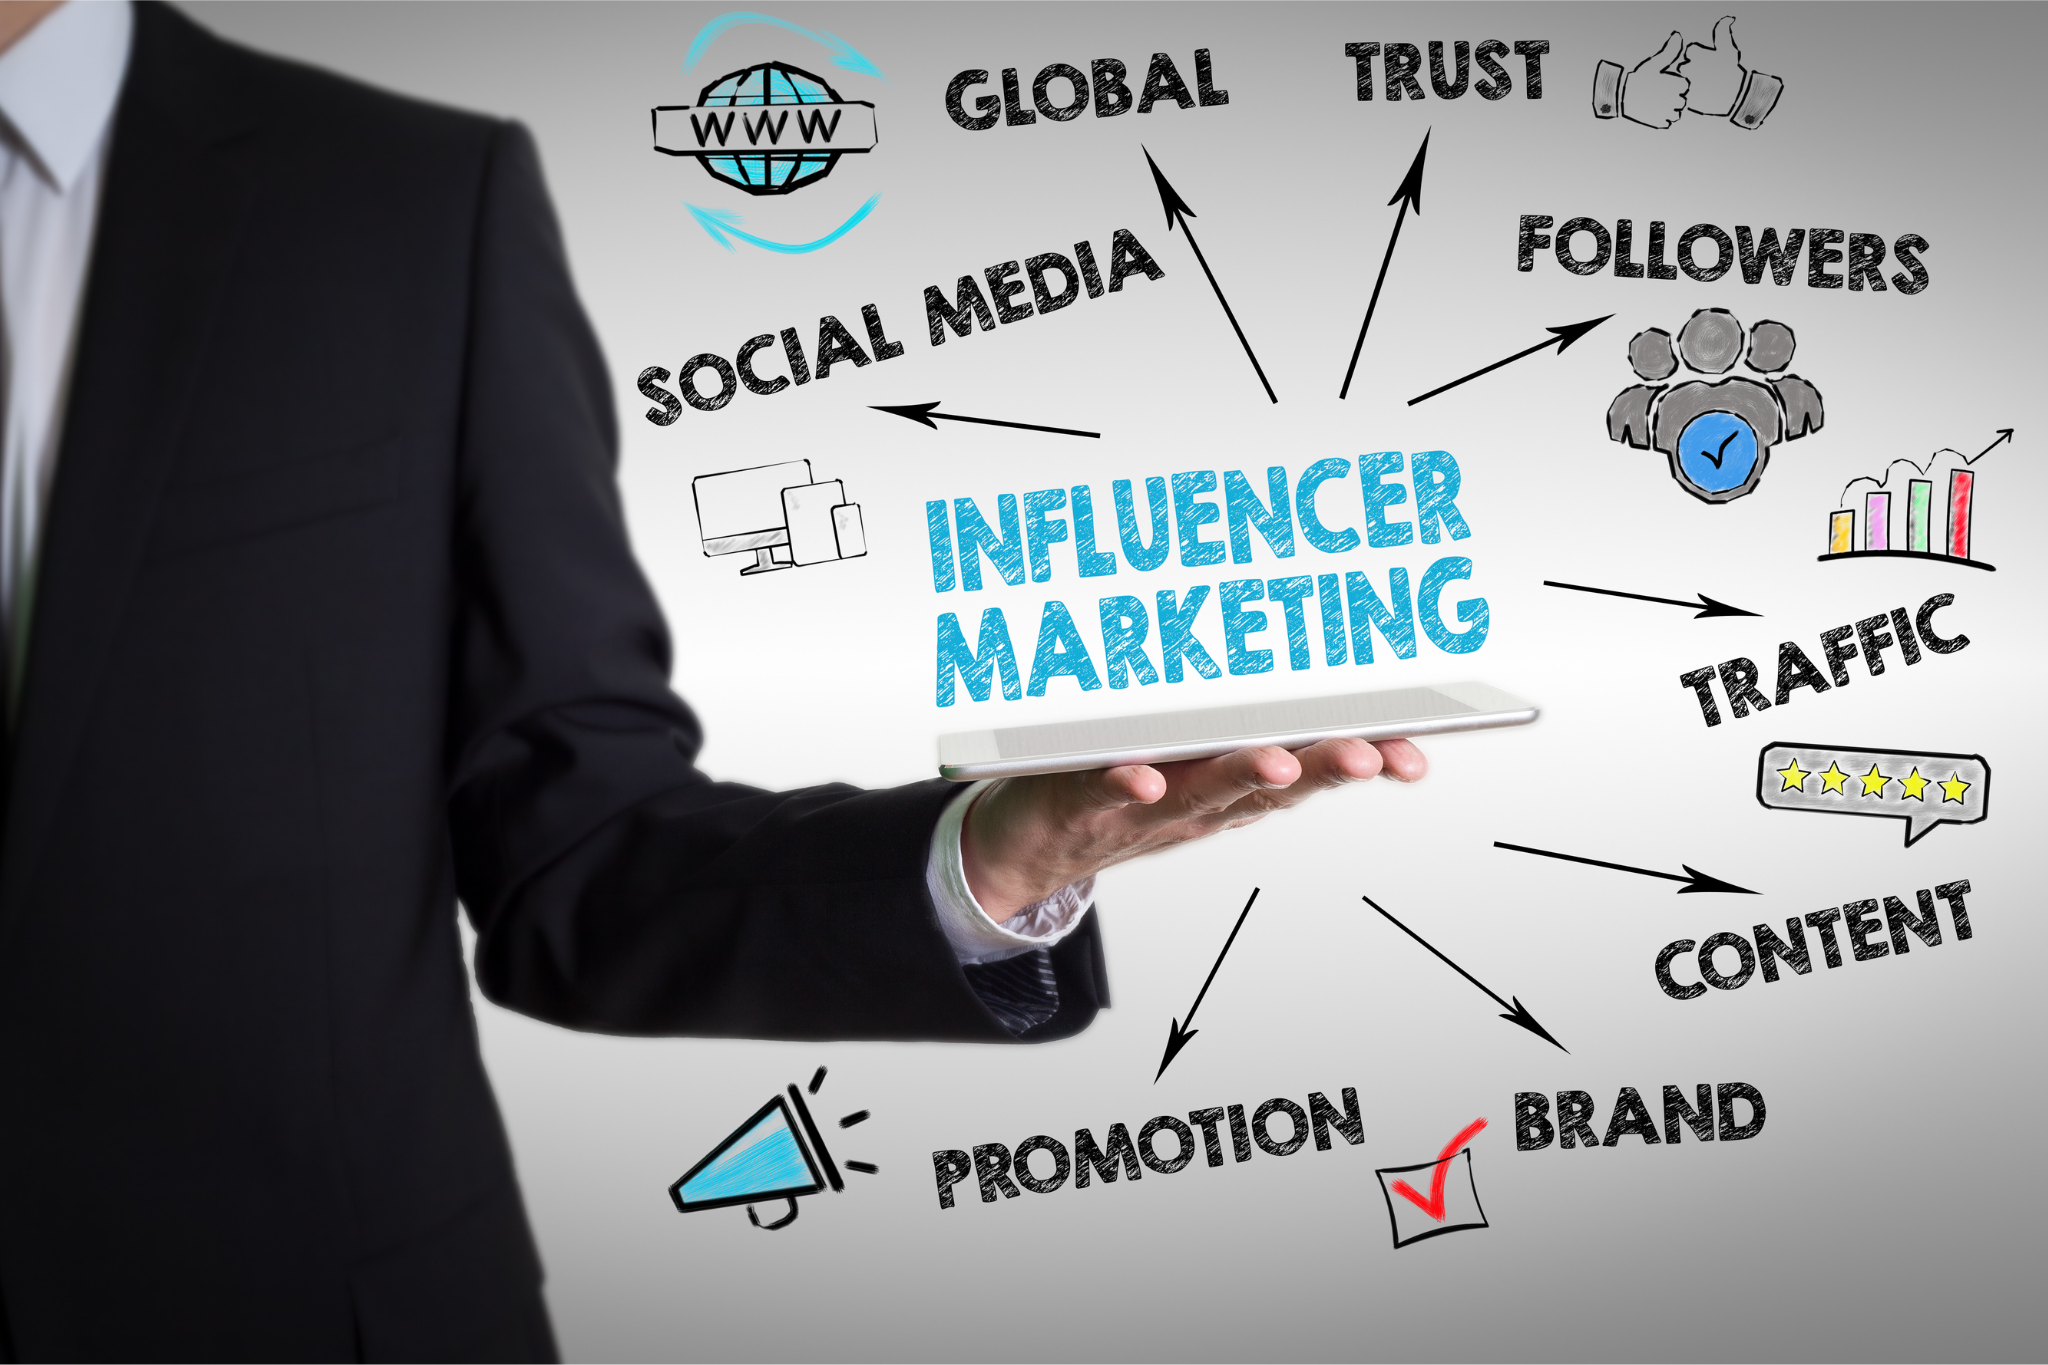 5 Tips to Get the Most Out of Your Influencer Marketing Campaign